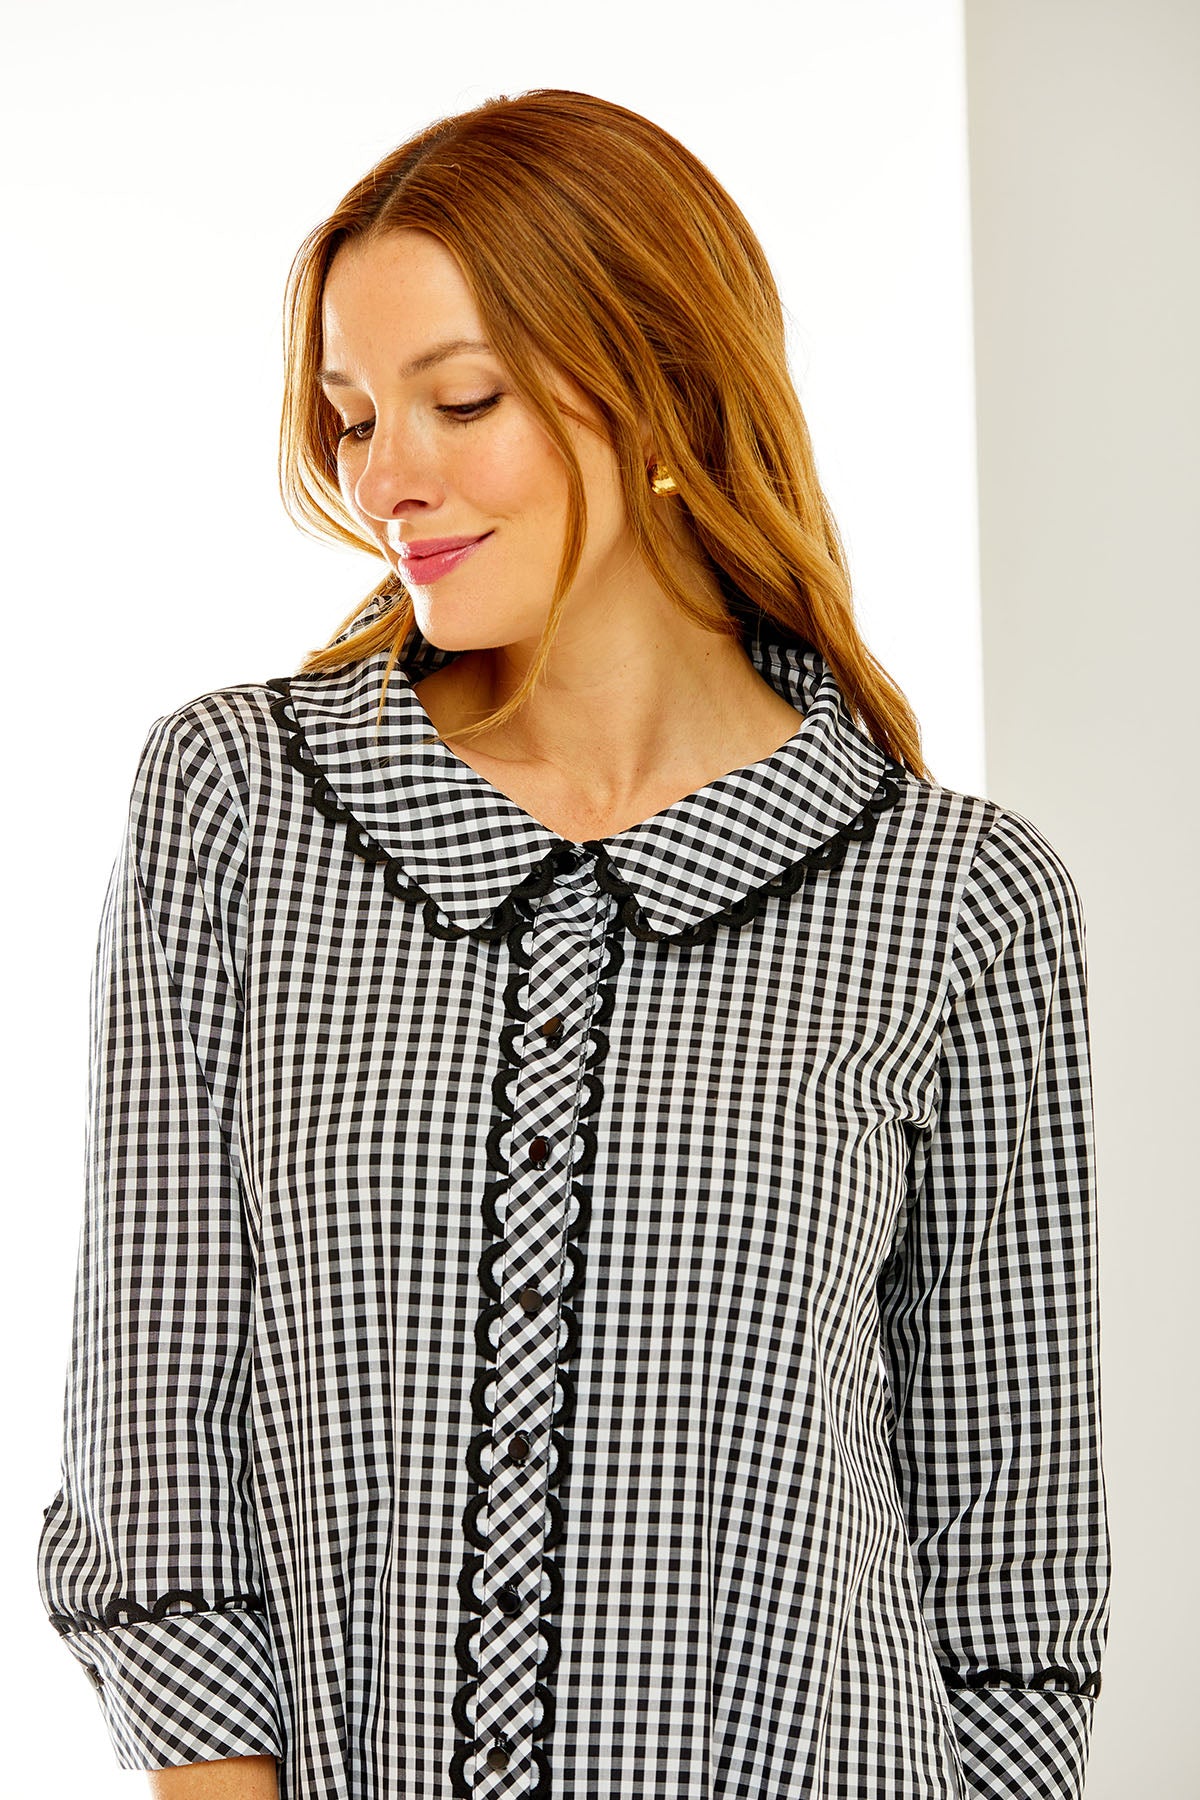 Woman in gingham top